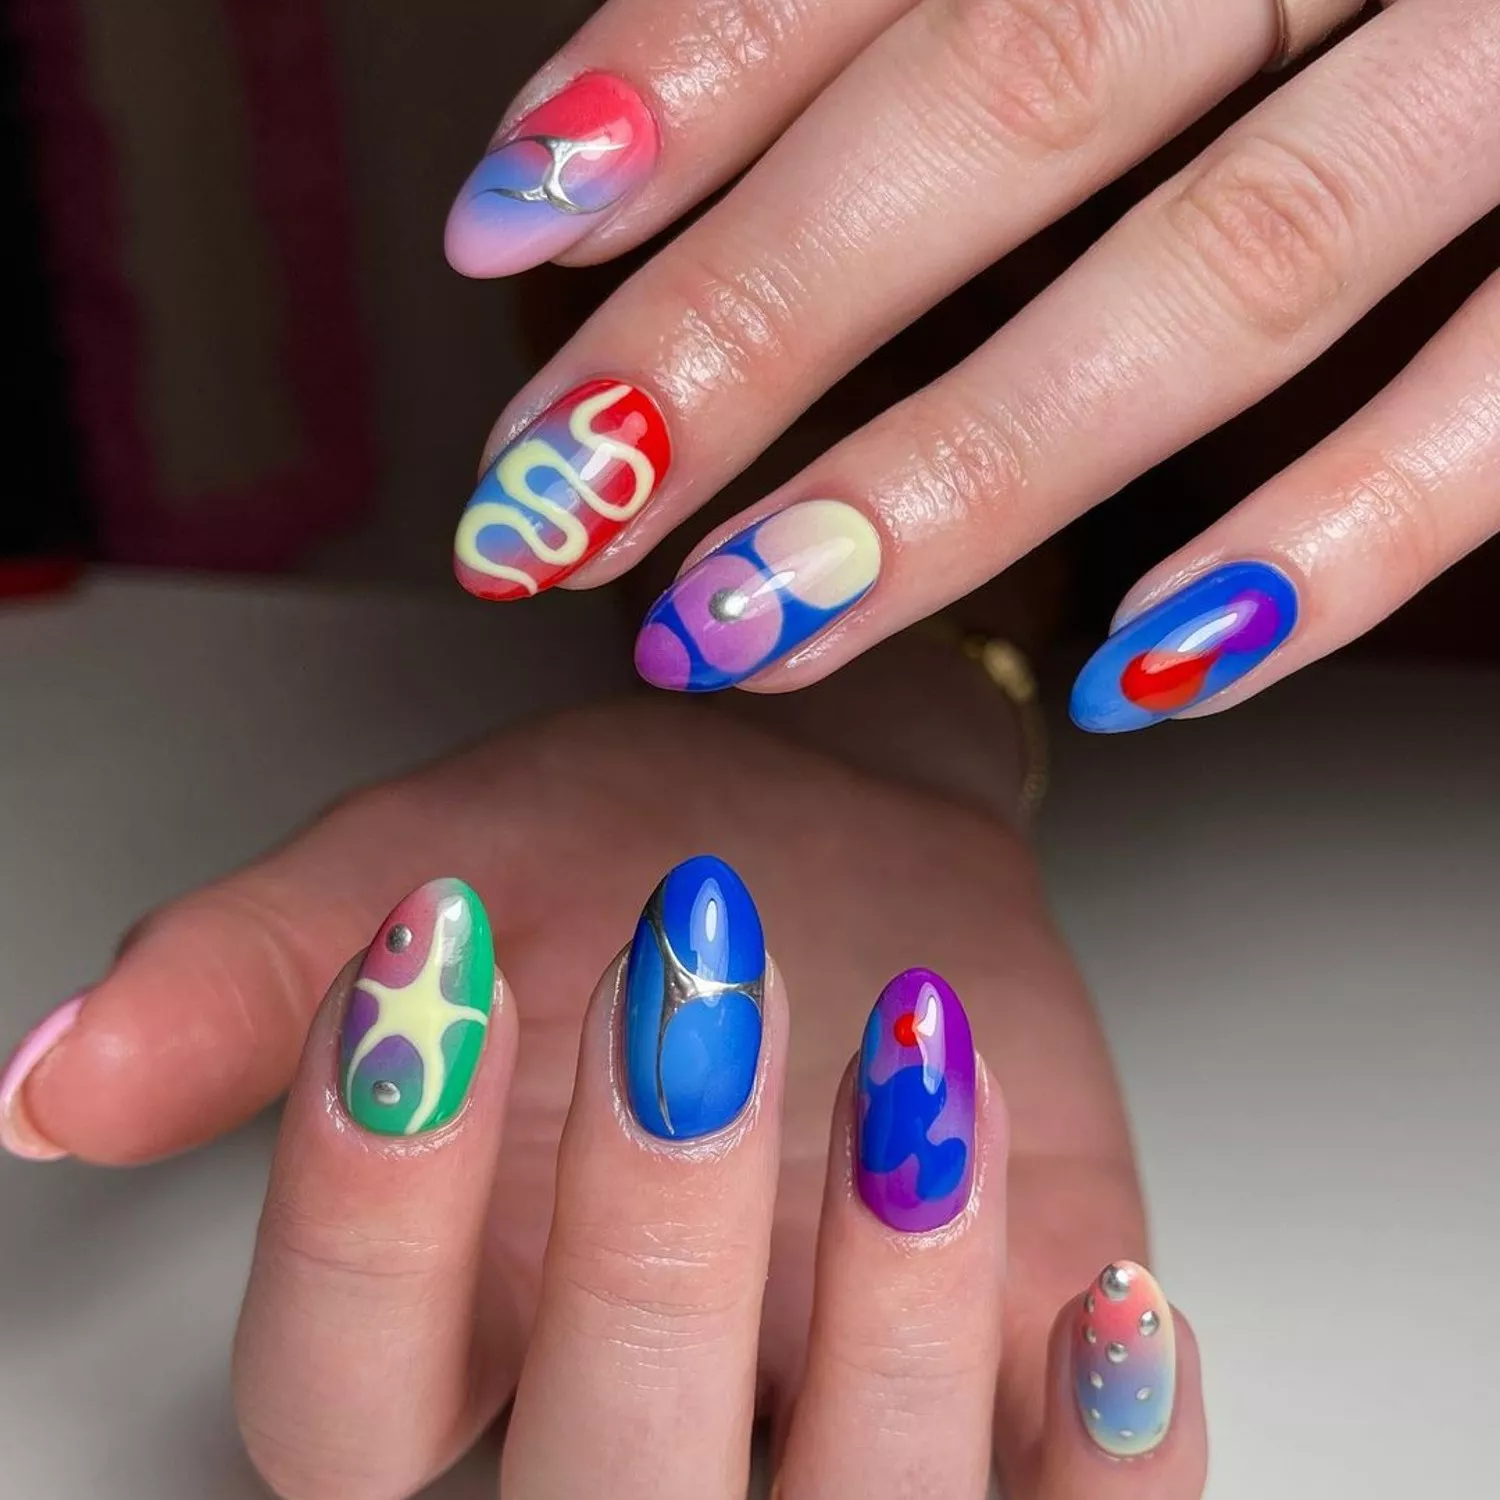 Aura manicure with mismatched colorful designs